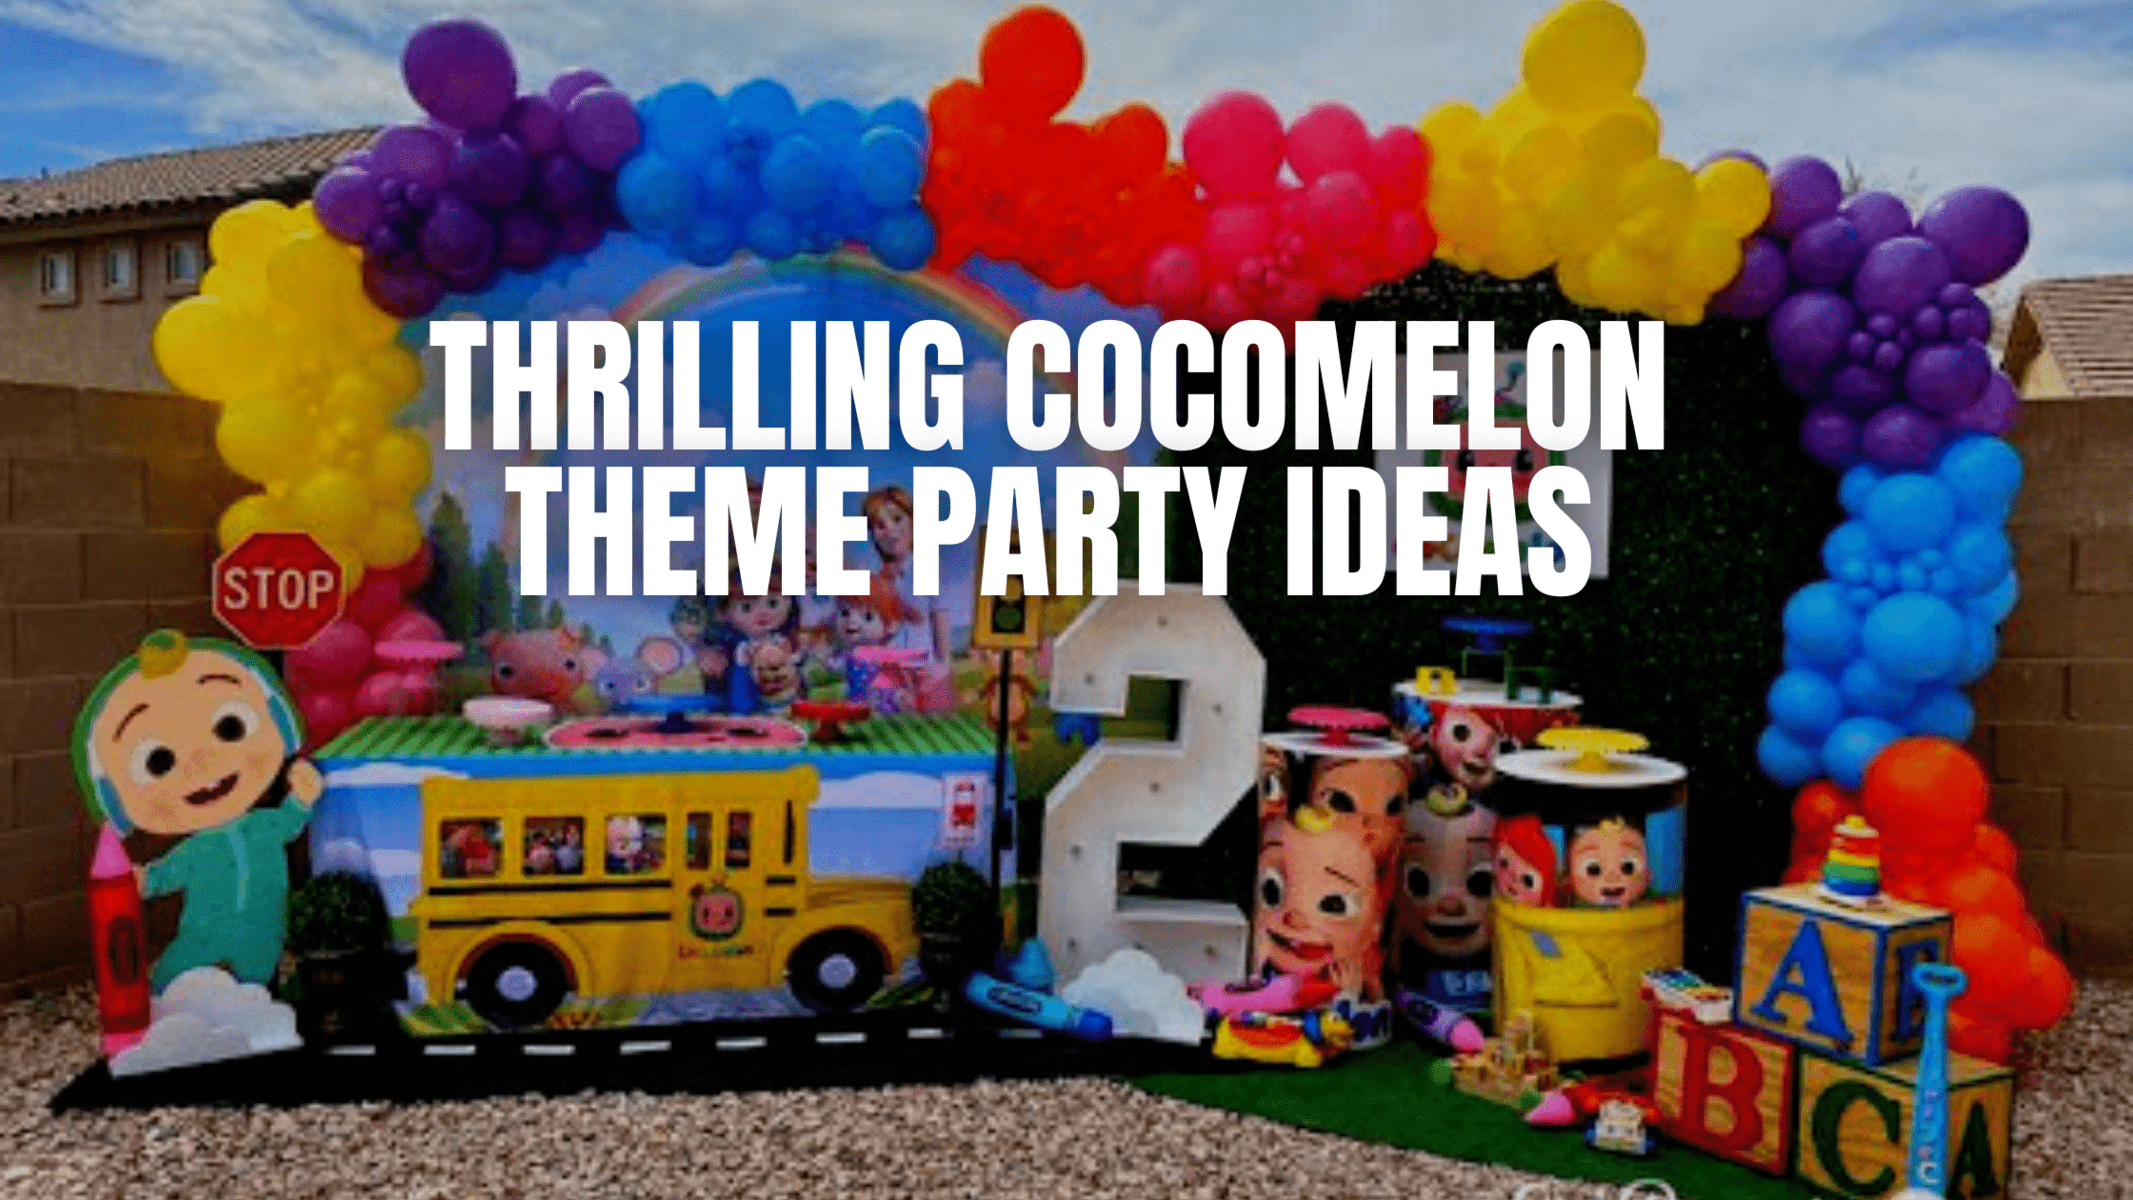 Your Ultimate Guide to Planning a Cocomelon Themed Kids Birthday Party with Decorations in 2022